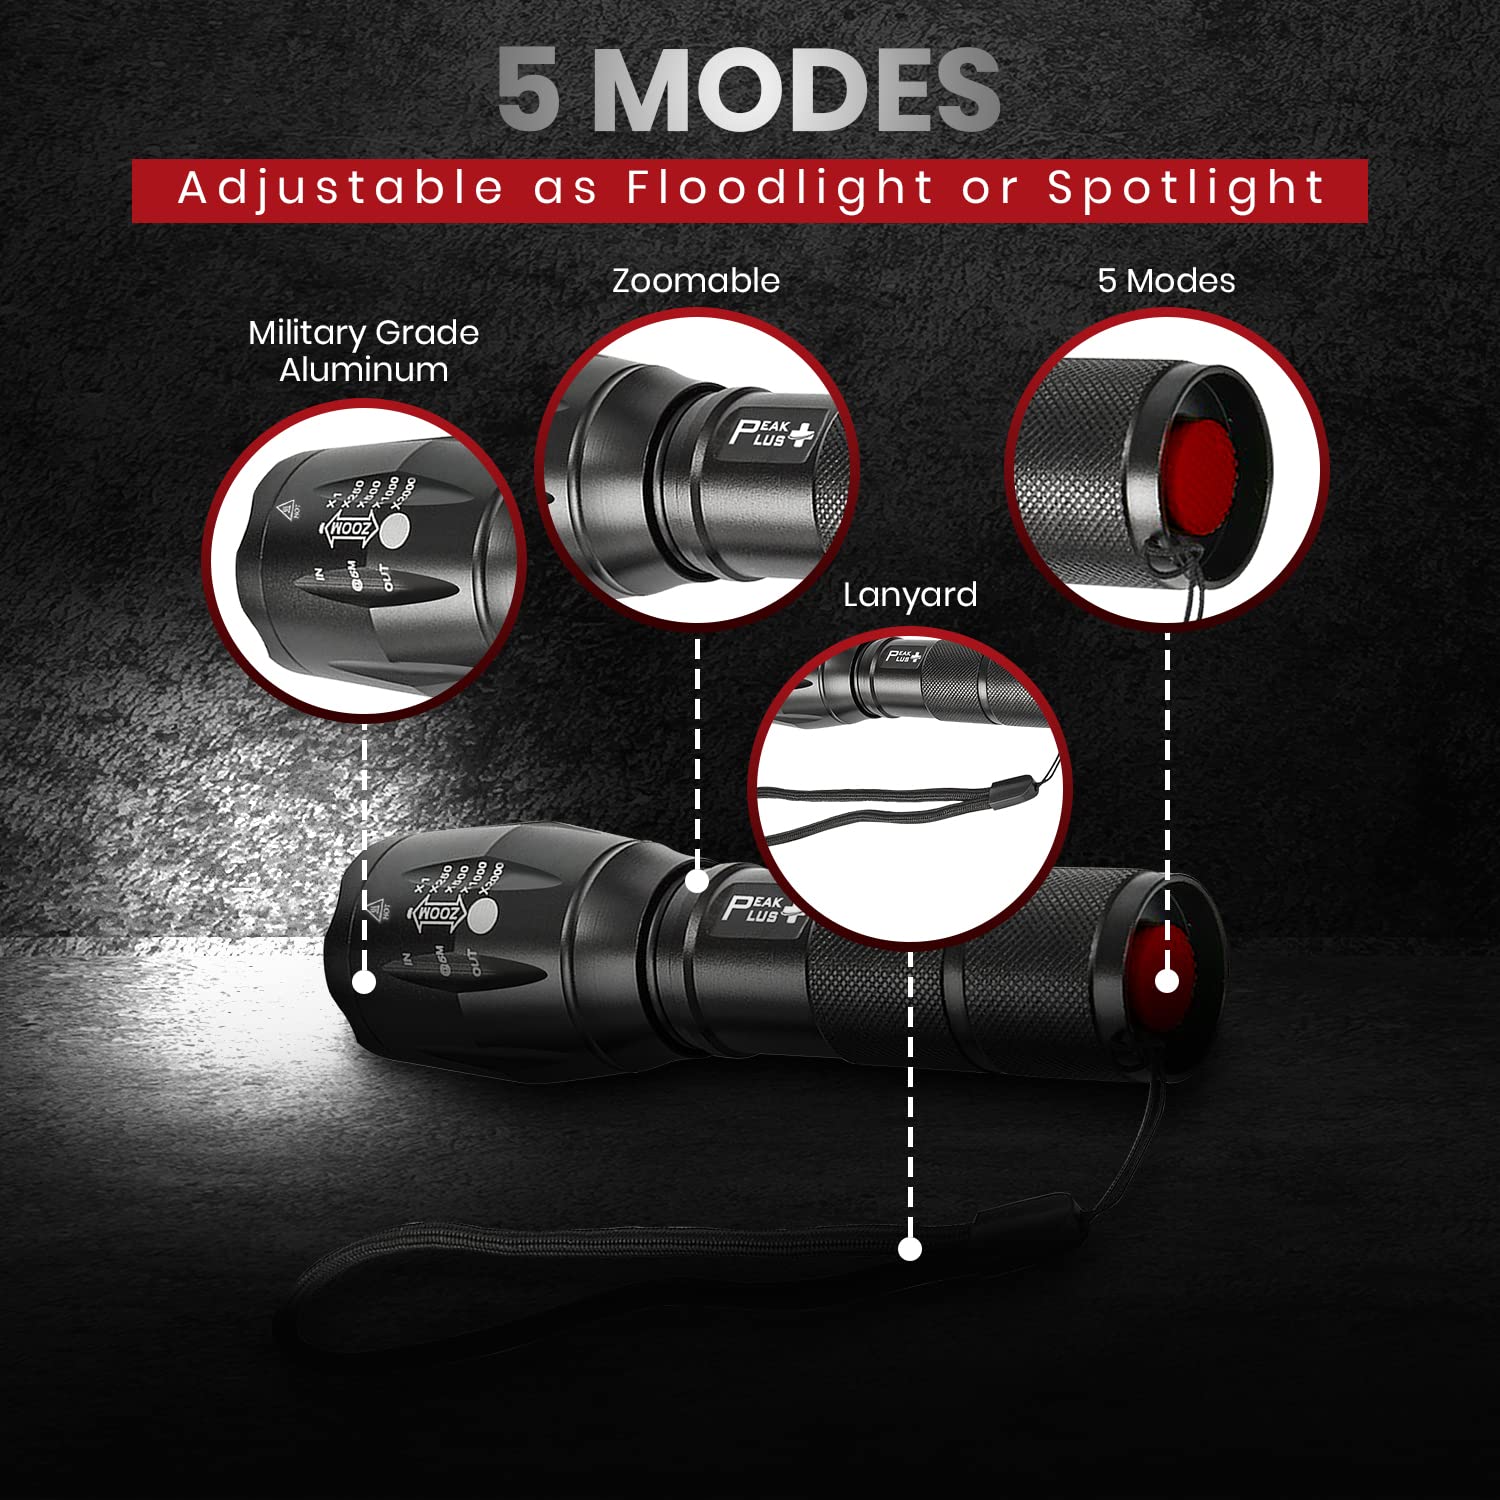 PeakPlus Rechargeable Tactical Flashlight LFX1000 (Rechargeable Battery and Charger Included) - High Lumens LED, Super Bright, Zoomable, 5 Modes, Water Resistant - Best Camping, Emergency Flashlights